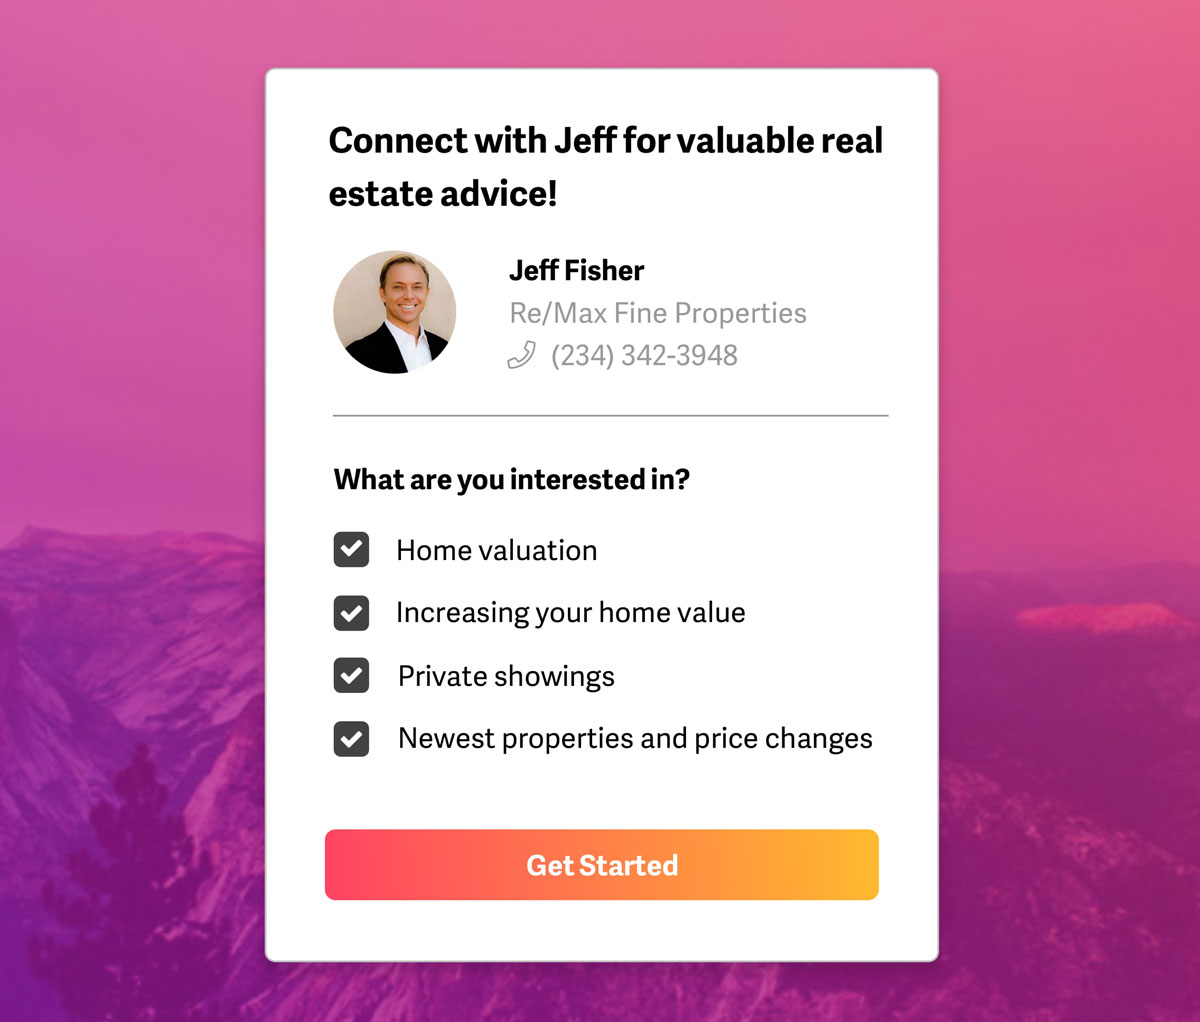 Your real estate agent bio page displays your active listings